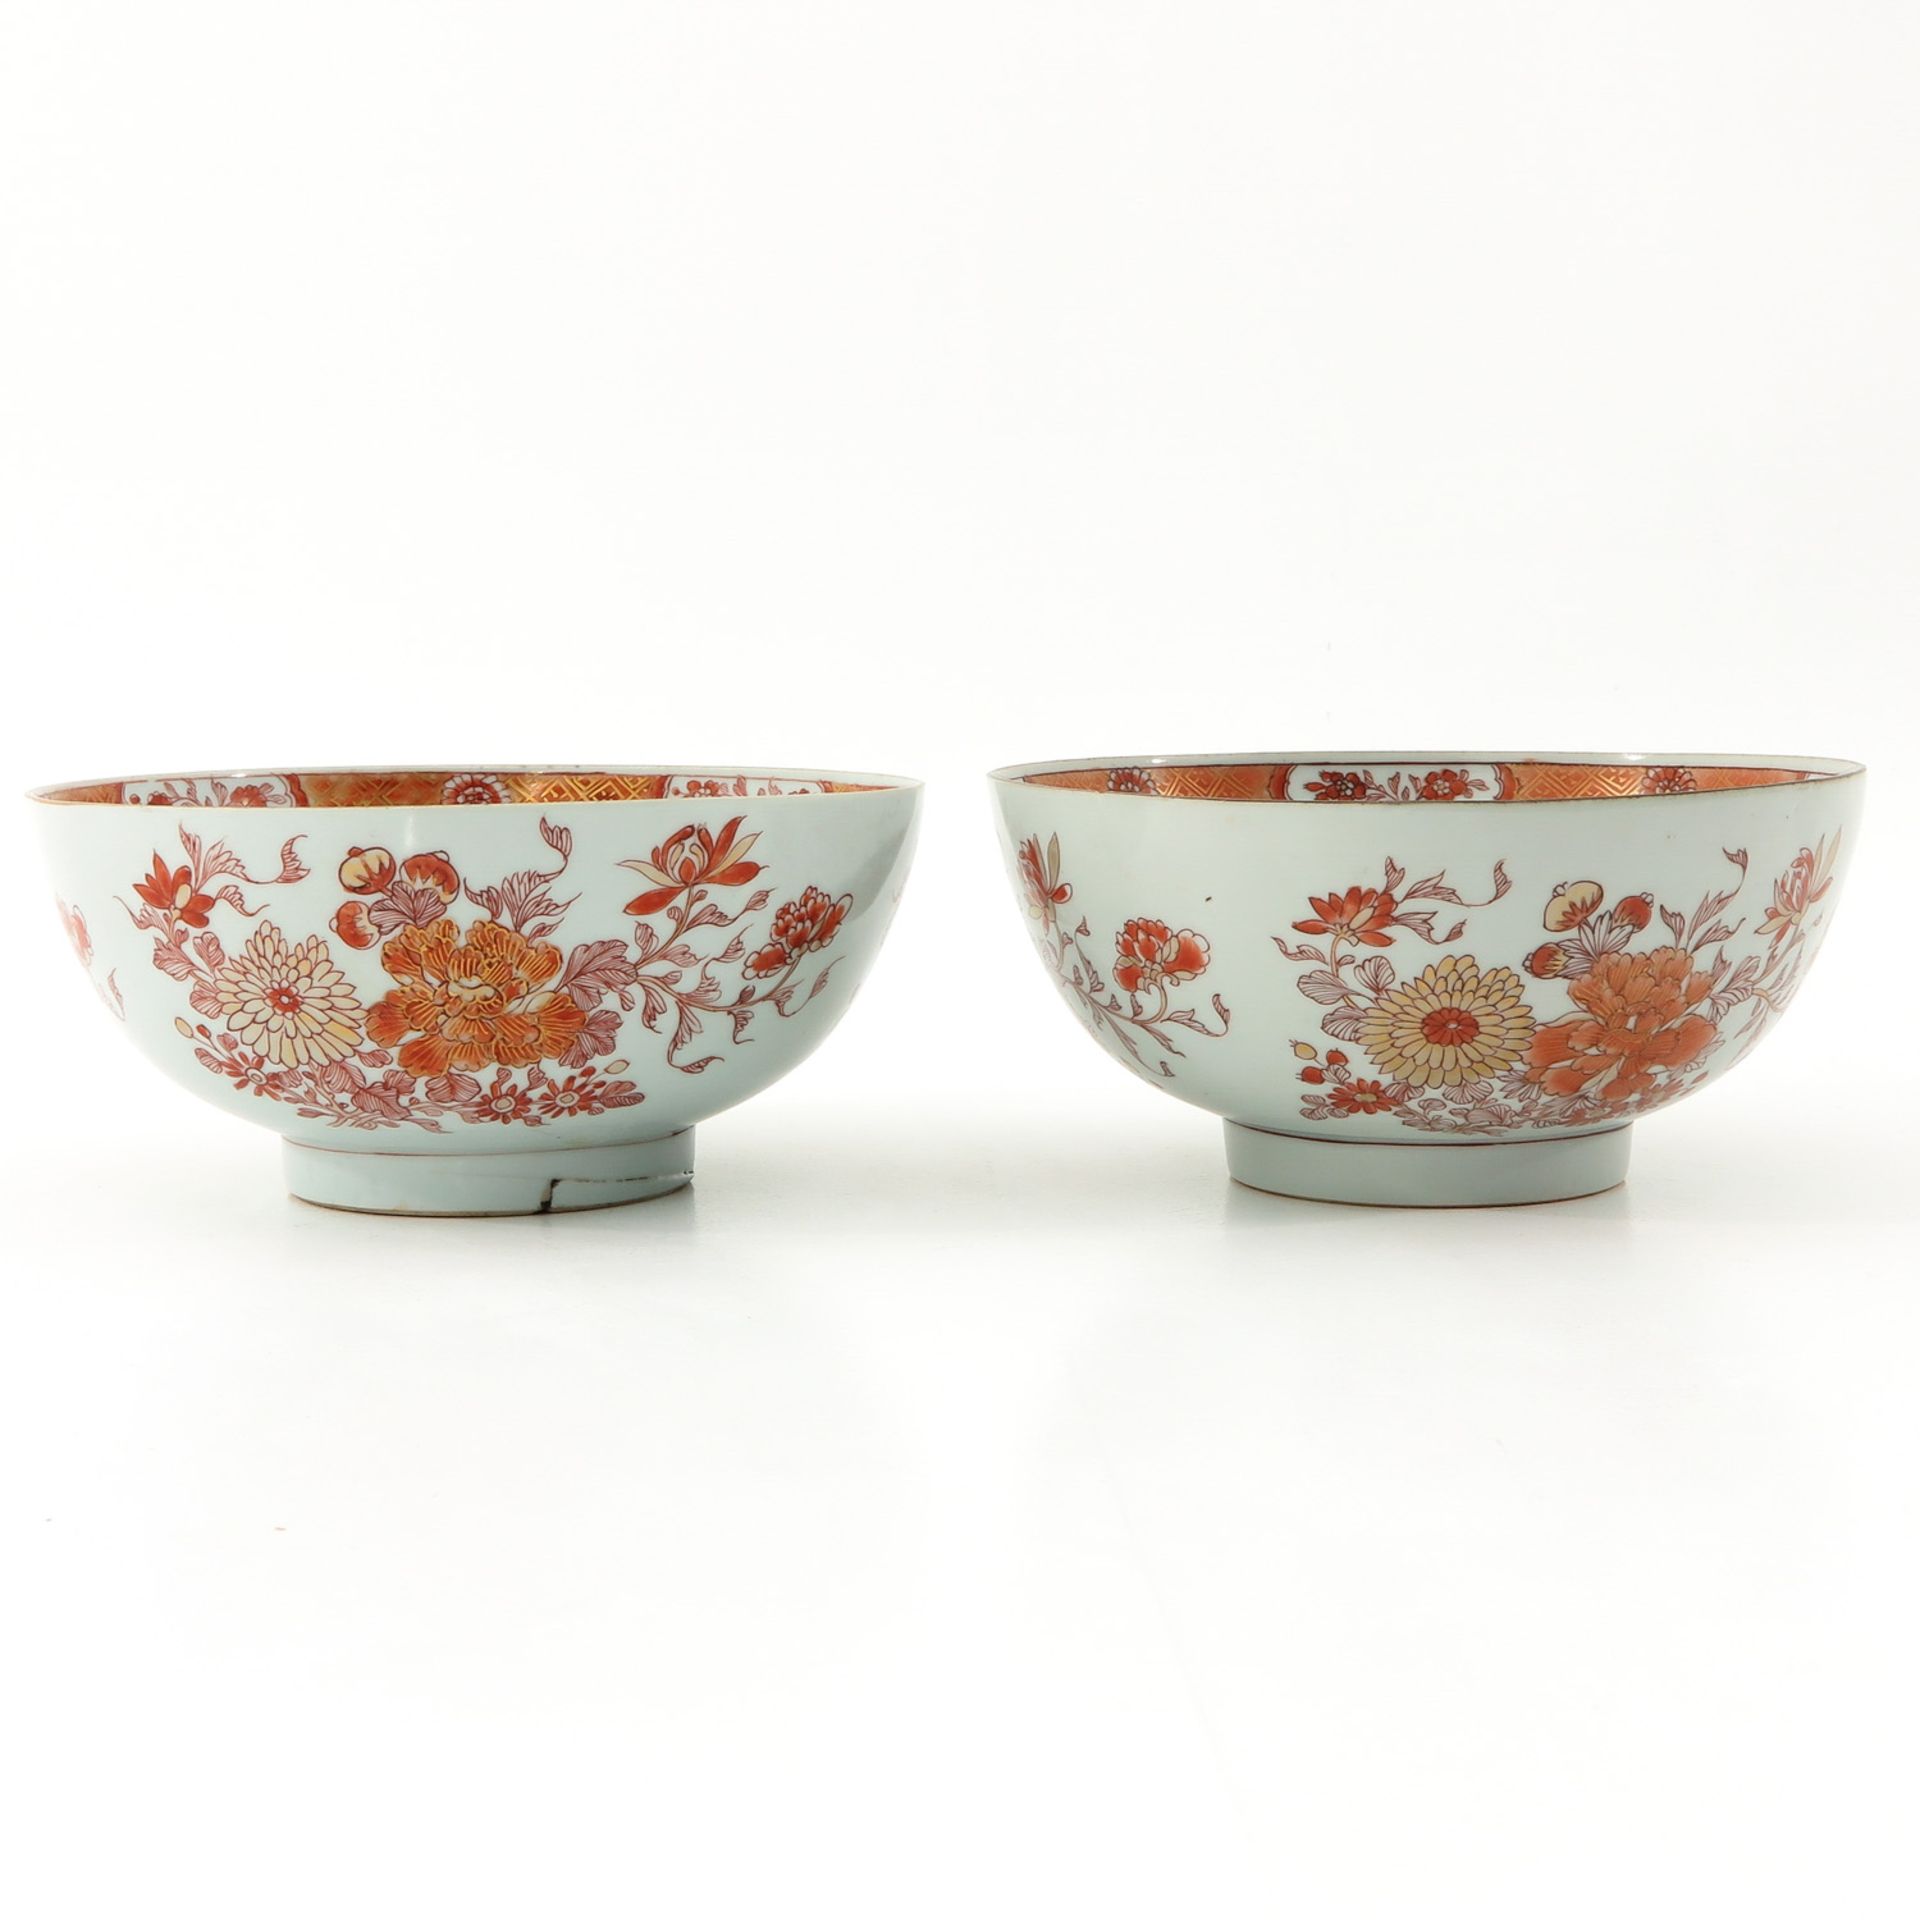 A Pair of Milk and Blood Decor Bowls